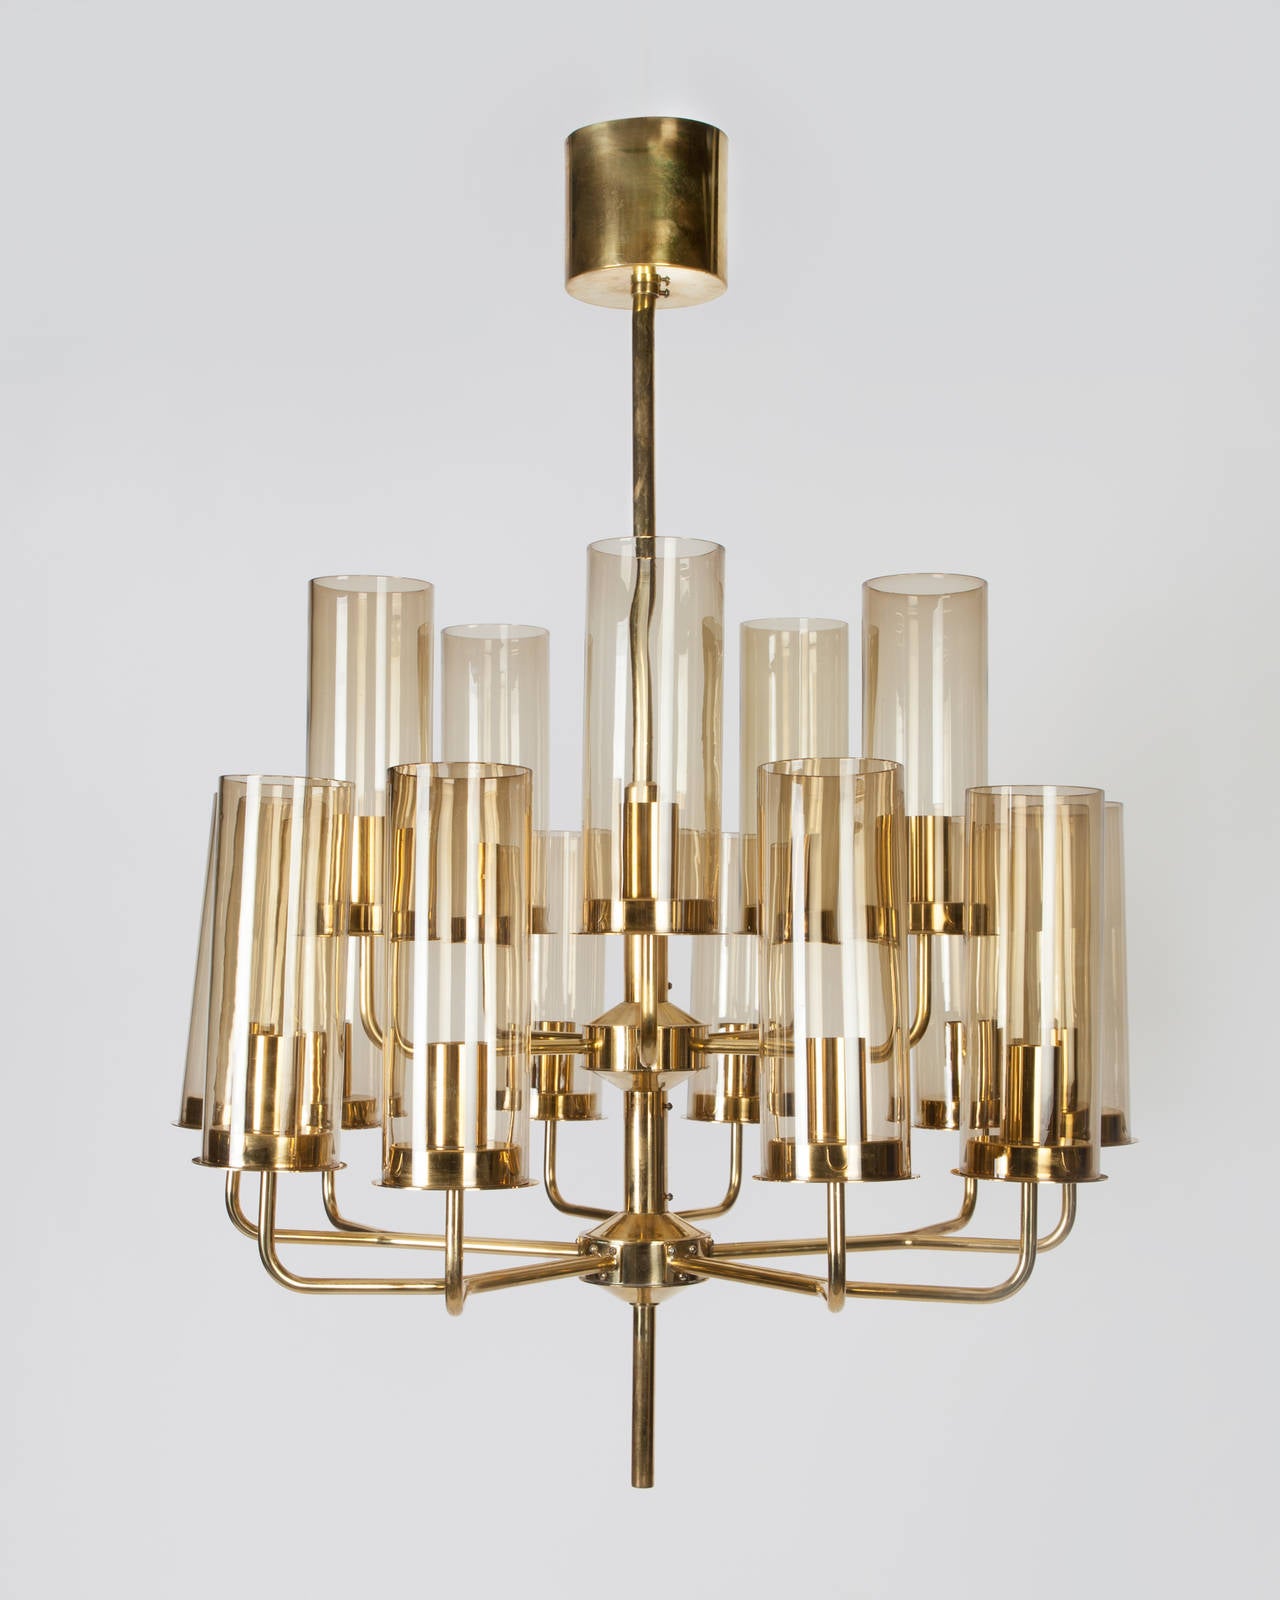 AHL3913

circa 1970
A fifteen-light chandelier with smoked glass shades in its original brass finish. By the Swedish maker Hans-Agne Jakobsson. Due to the antique nature of this fixture, there may be some nicks or imperfections in the